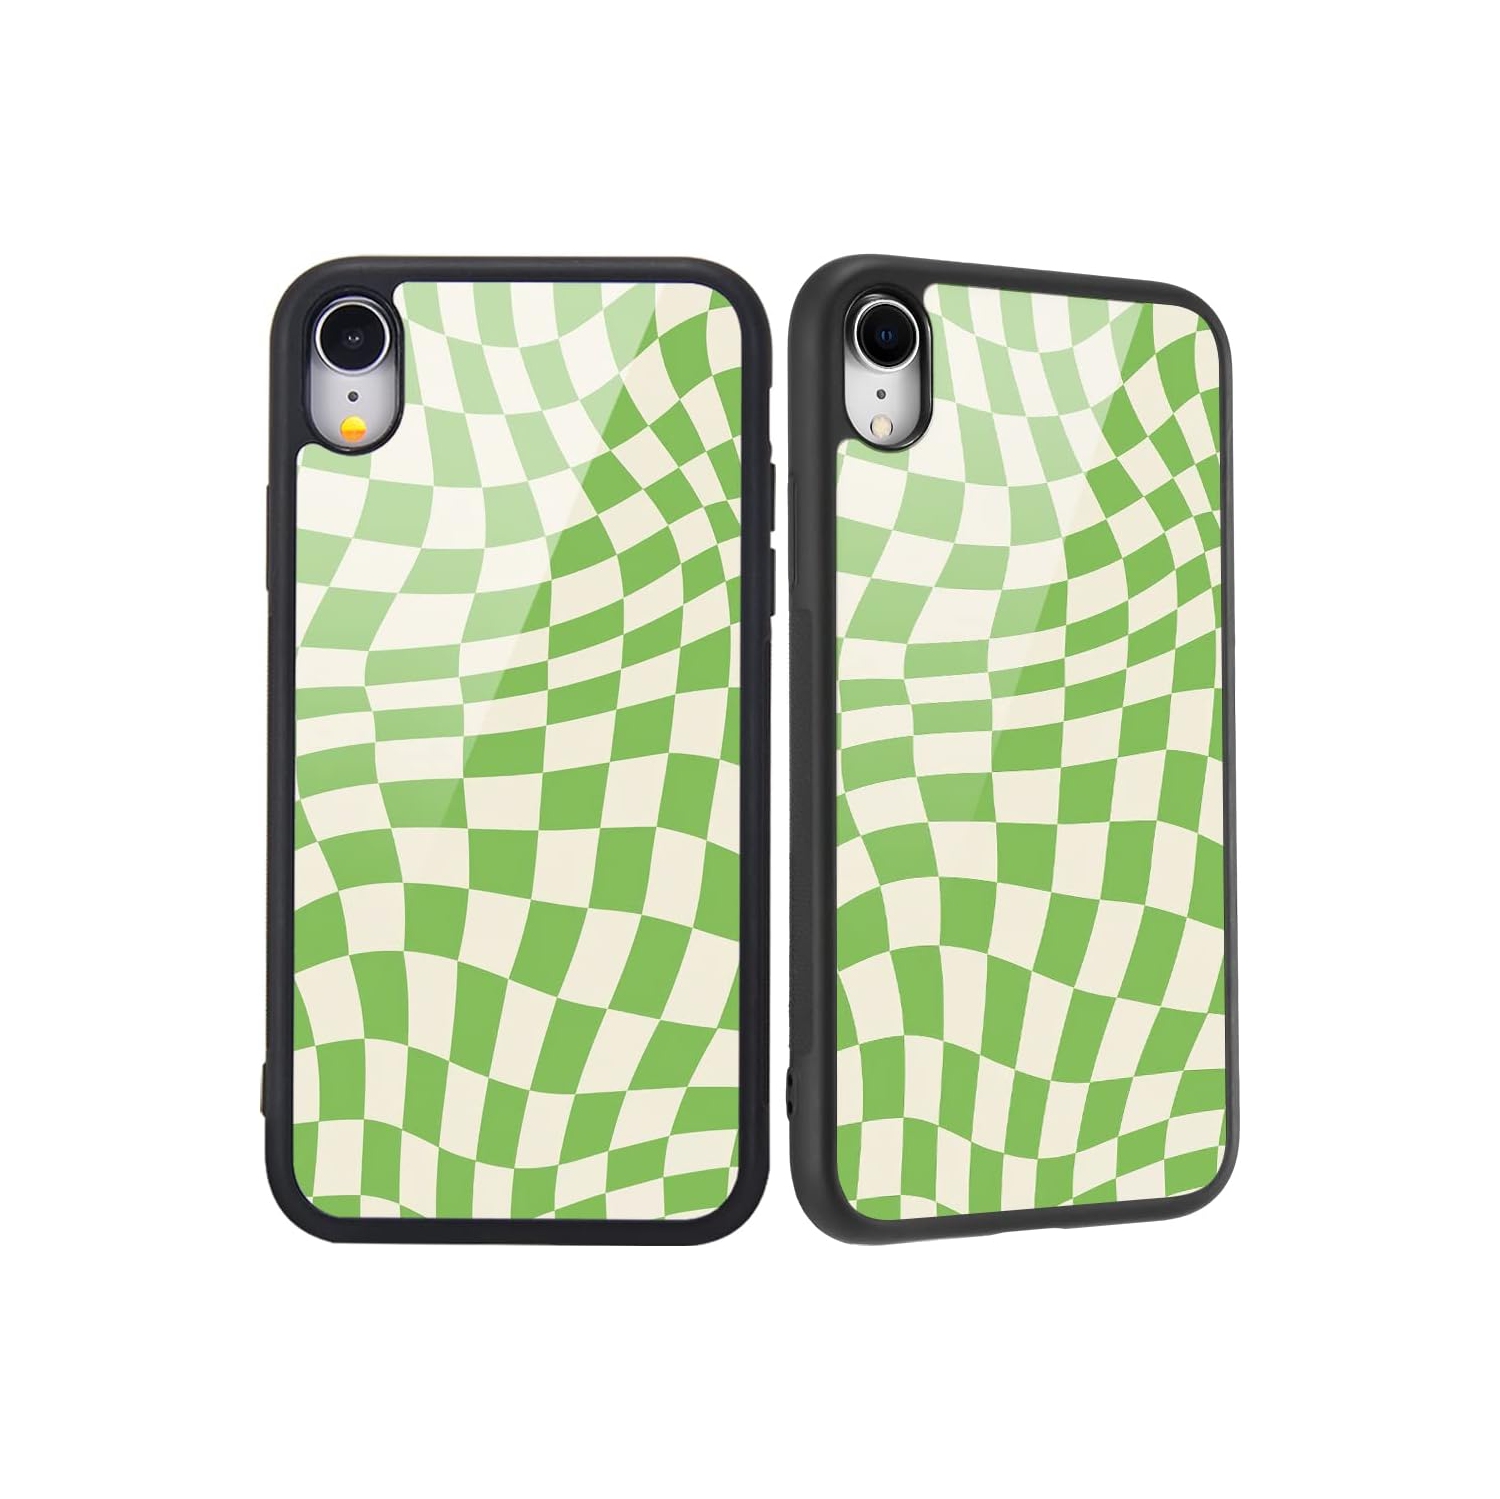 Compatible with iPhone X/iPhone Xs Case Twist Green Checkerboard Design, Hard Back with Grid Plaid Tartan